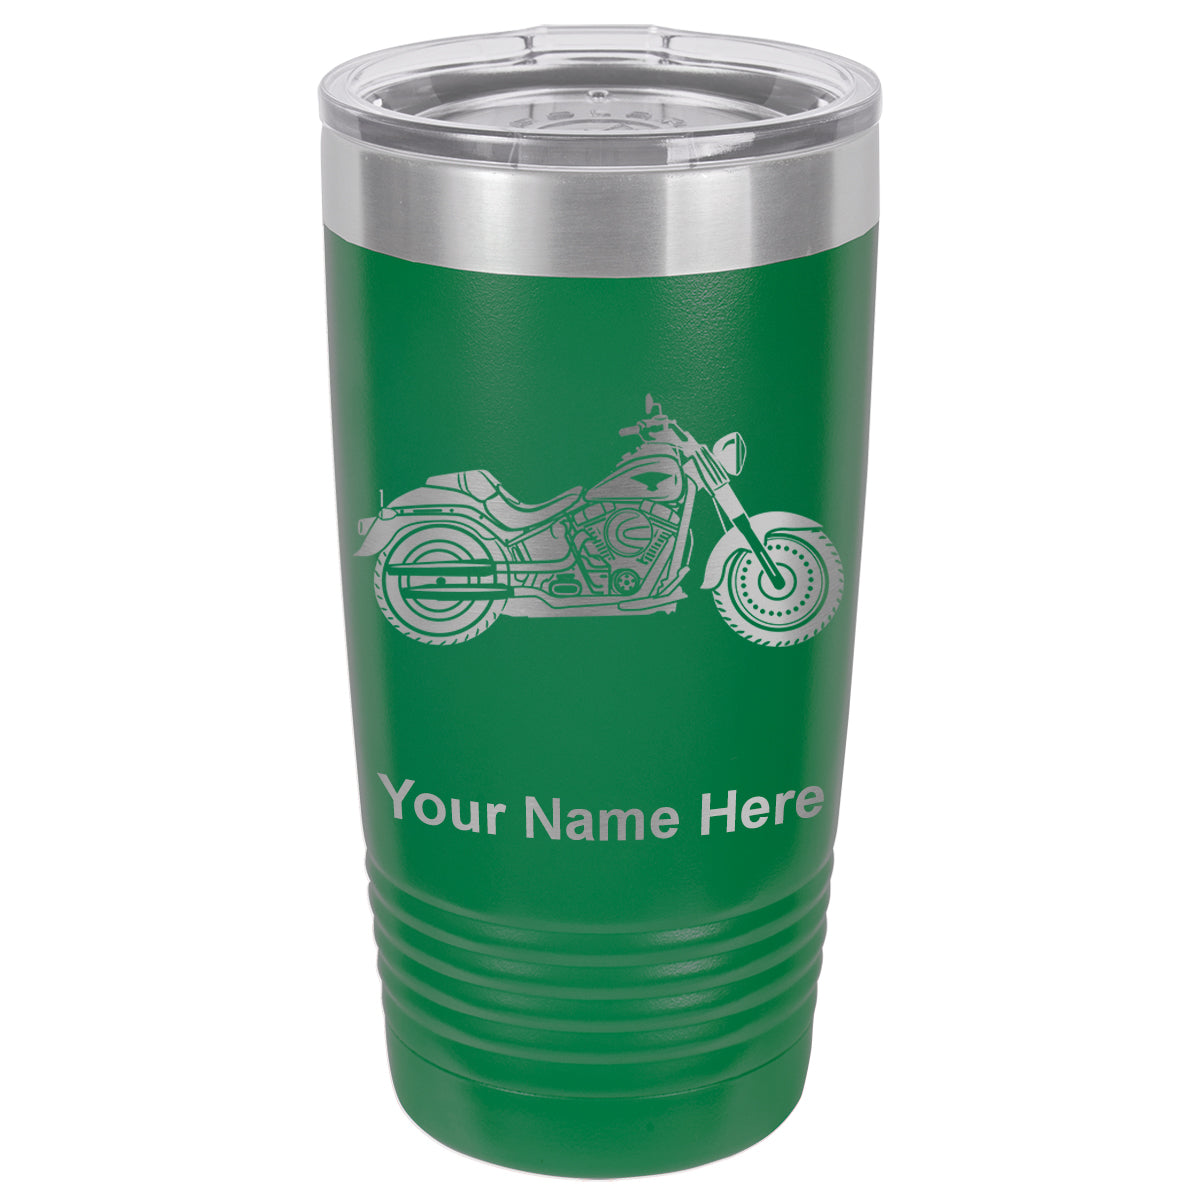 20oz Vacuum Insulated Tumbler Mug, Motorcycle, Personalized Engraving Included